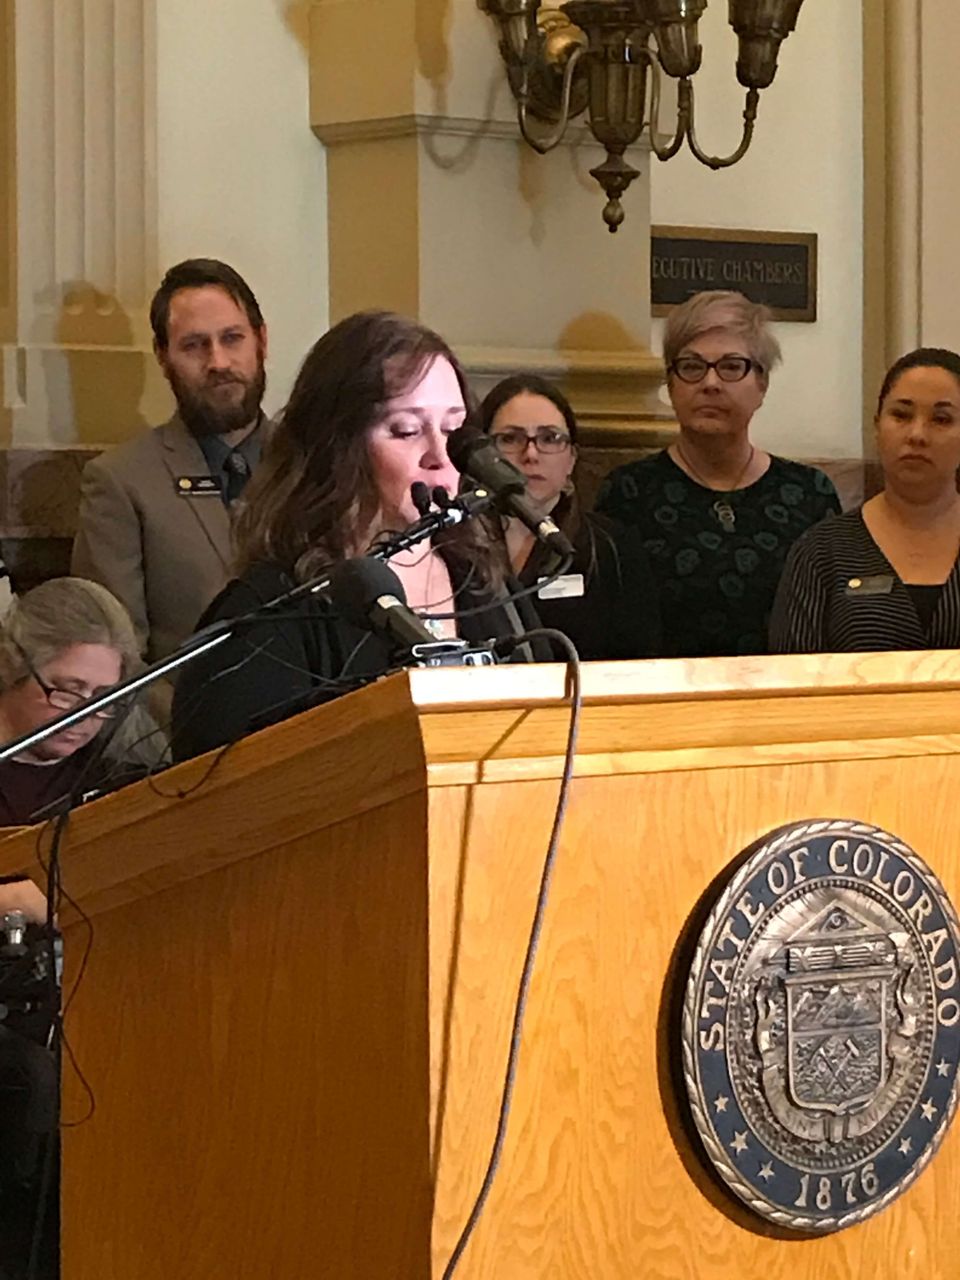 Mozaro Founder Shawn Satterfield testifying at Colorado State Capital regarding the impact of high health insurance premiums on small businesses